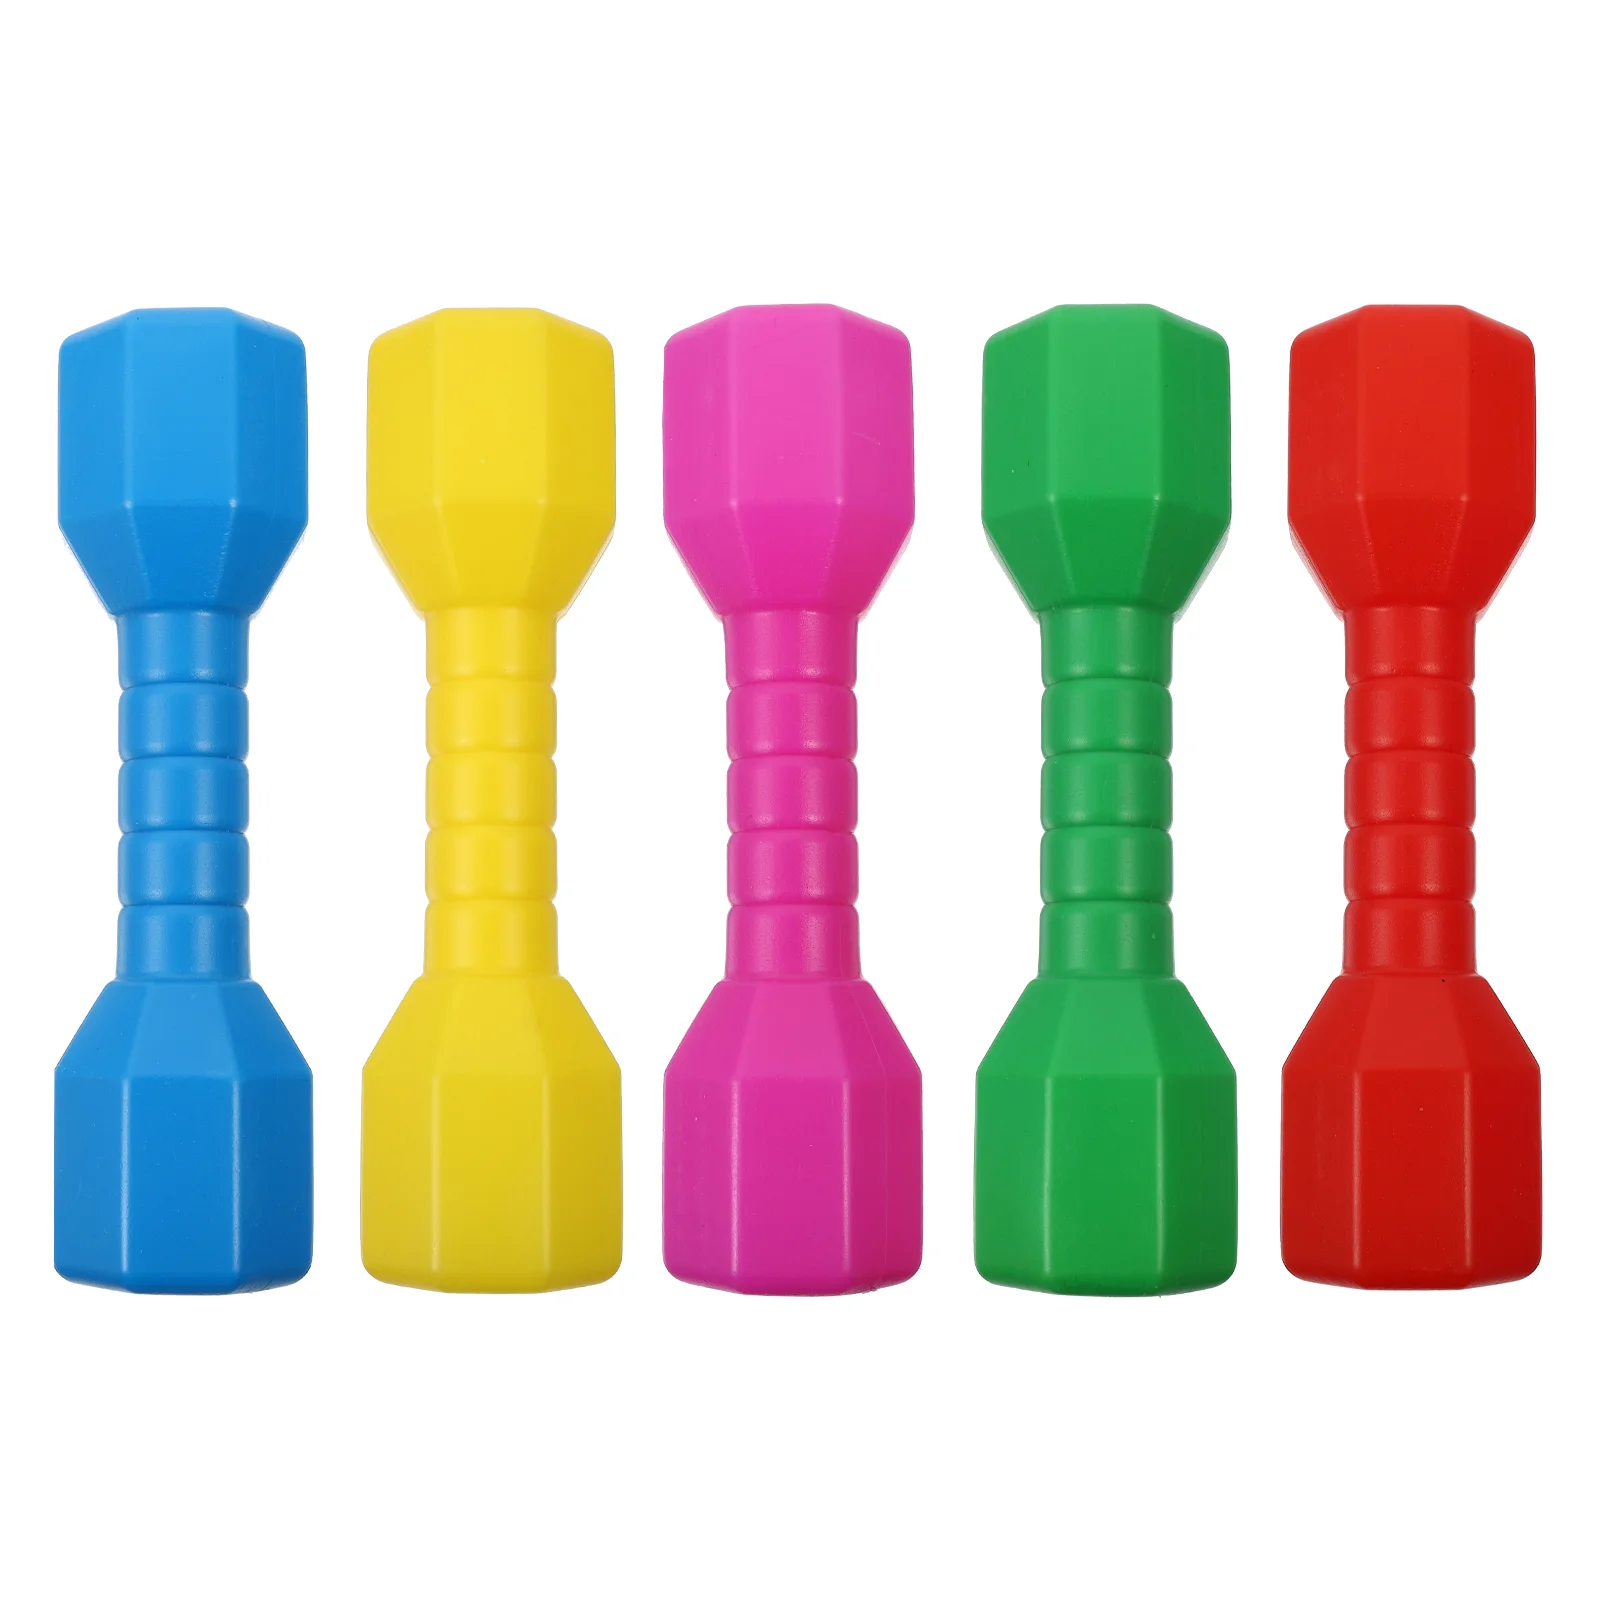 

Kids Toy Dumbbell Children Exercise Barbell Dumbbells Home Toys Fitness Plastic Weights Hand Equipment Kid Gym Weight Set Sports